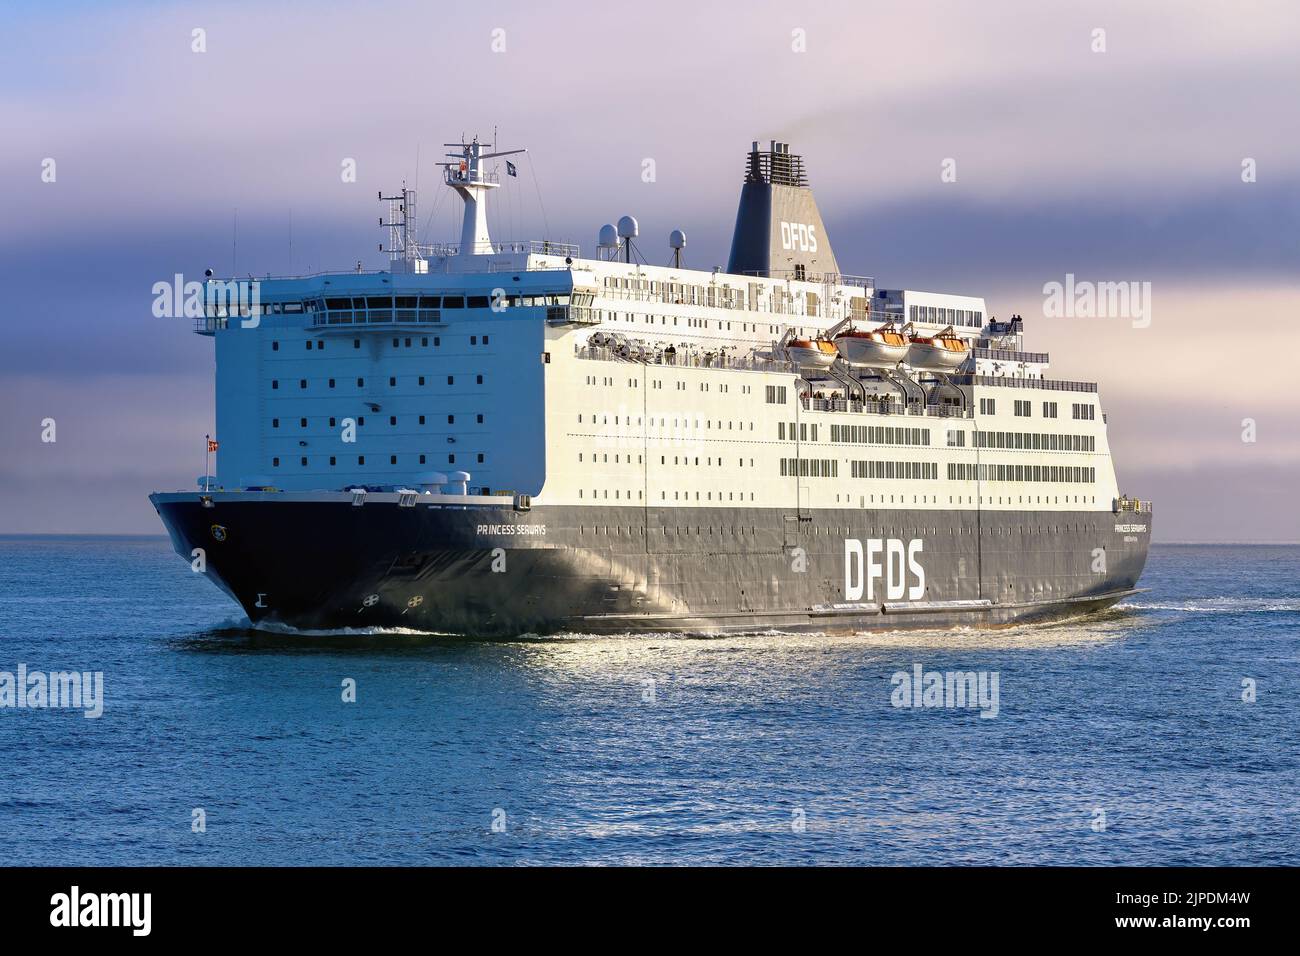 Princess Seaways is a ferry operated by DFDS on the Newcastle (North Shields) - Amsterdam (Ijmuiden) route - September 2021. Stock Photo